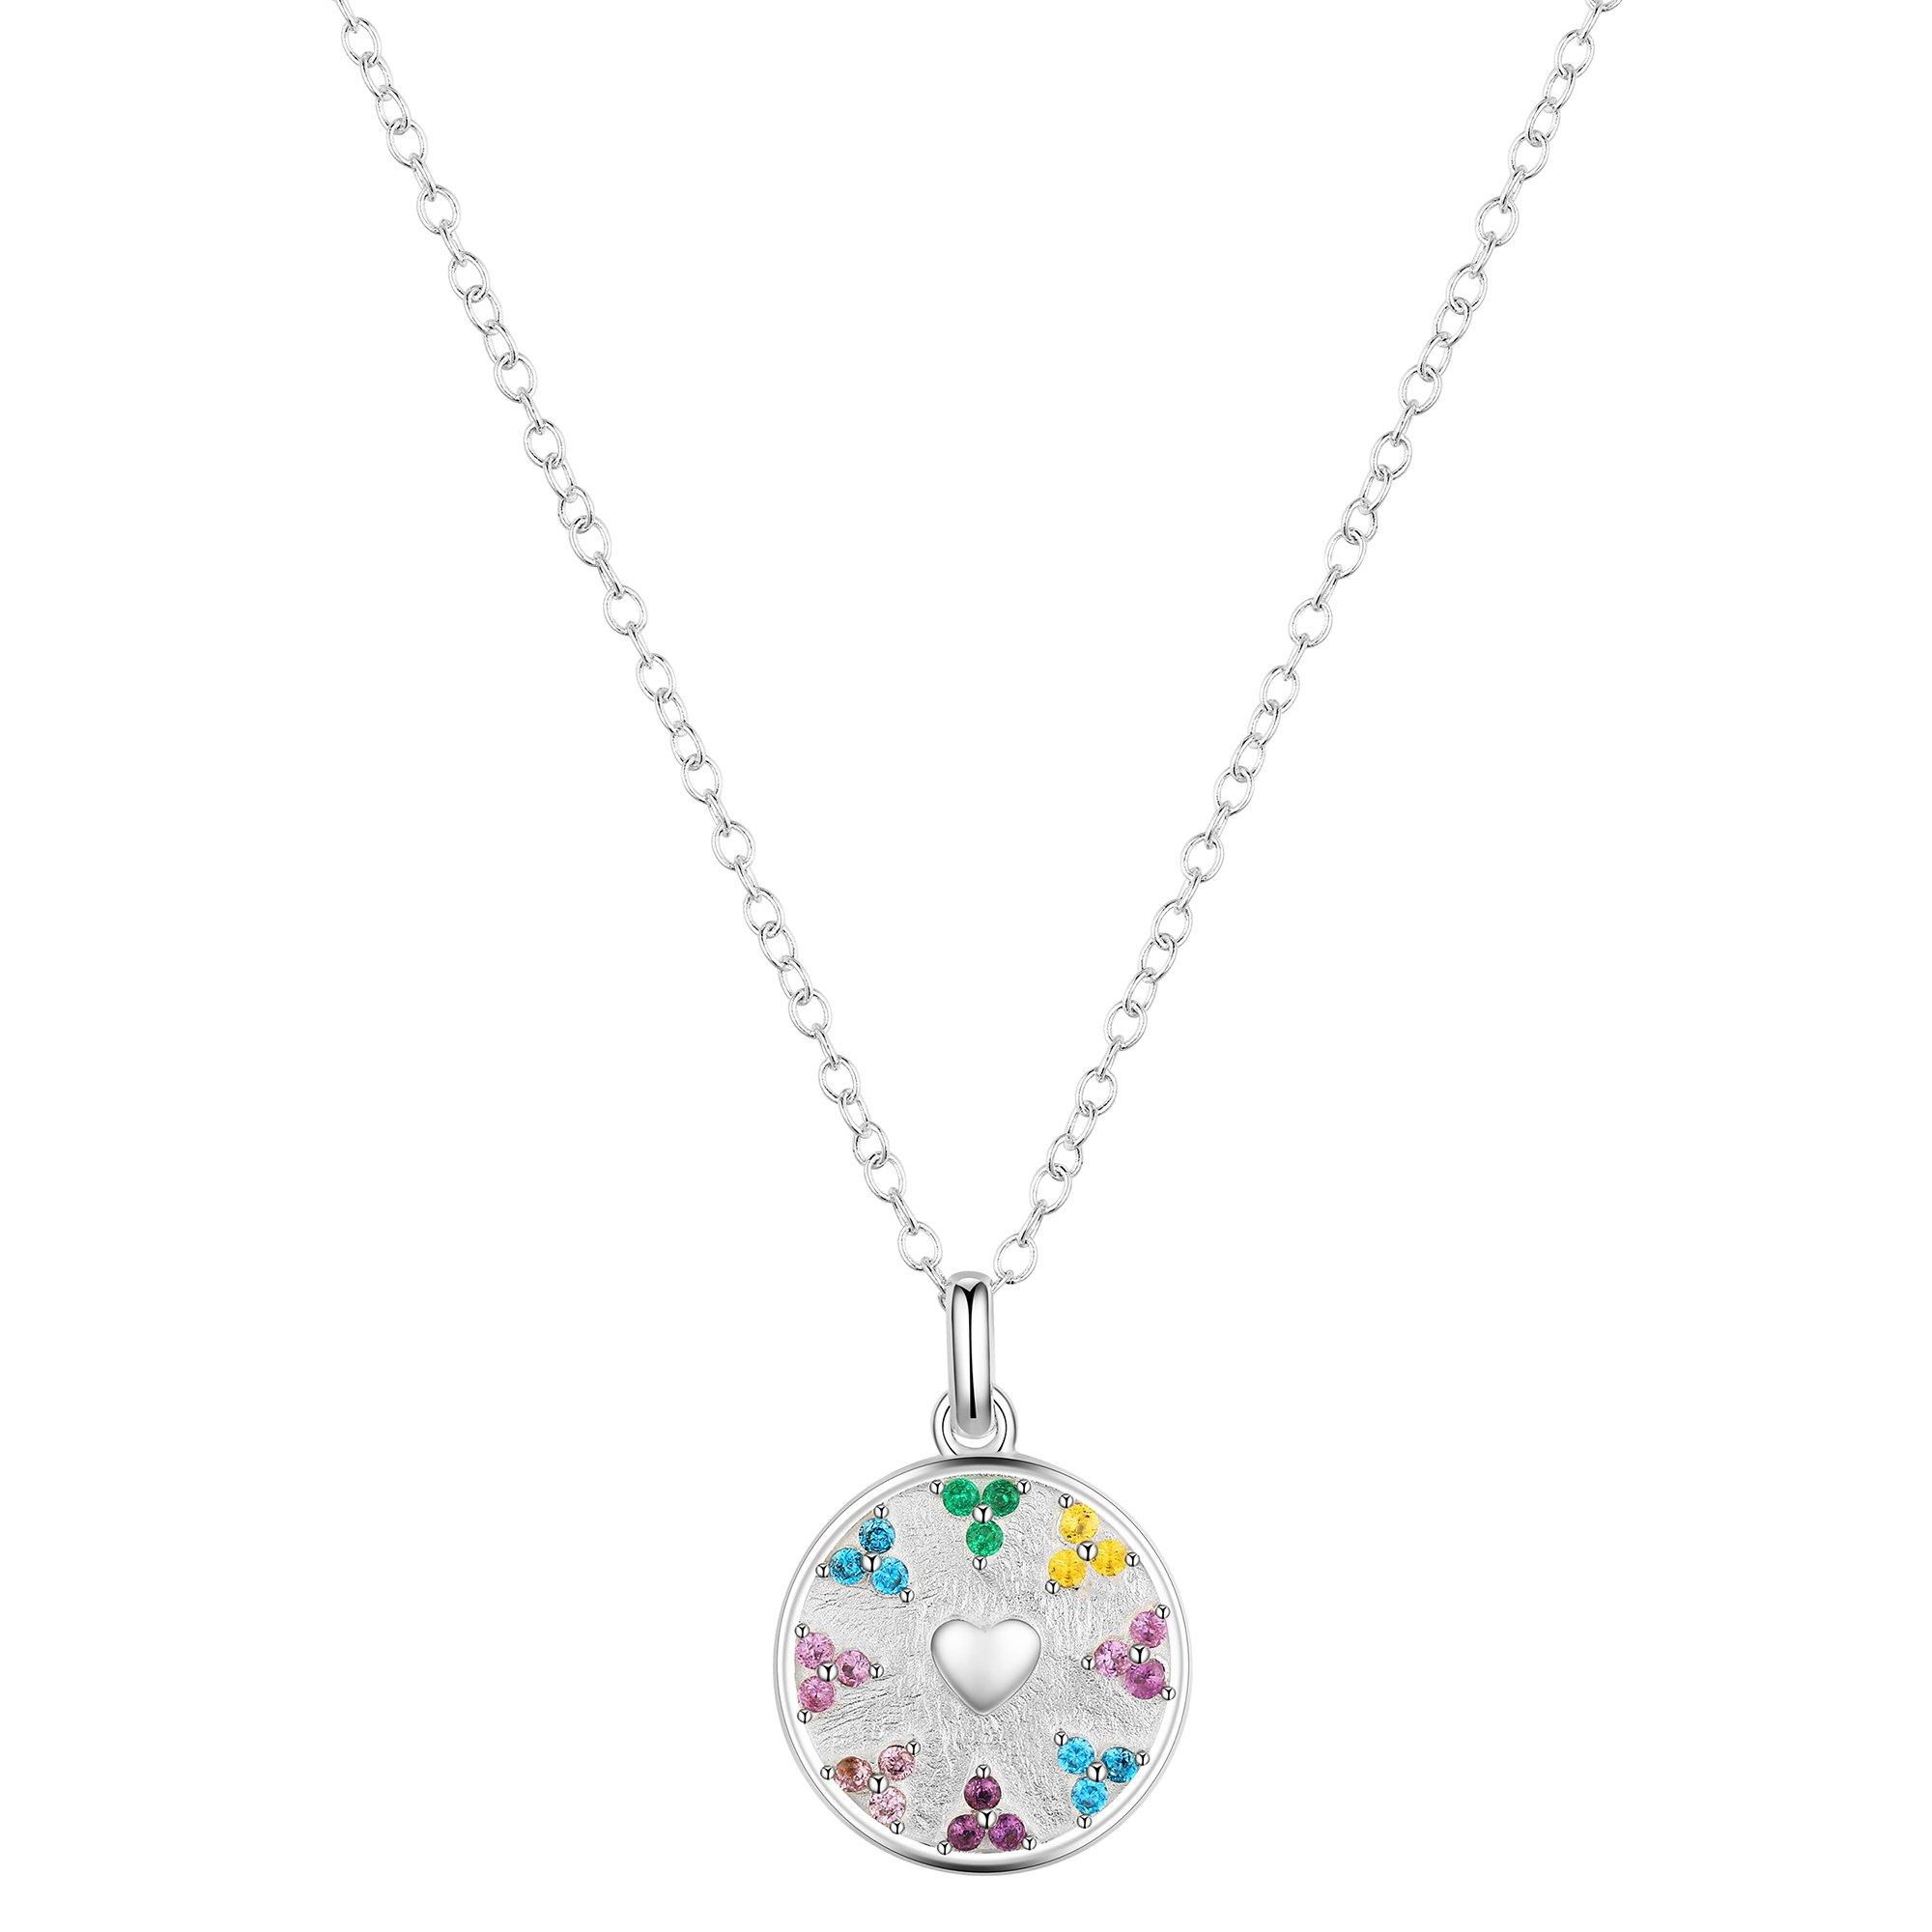 16 In. Pave 7 Chakras Chain Necklace